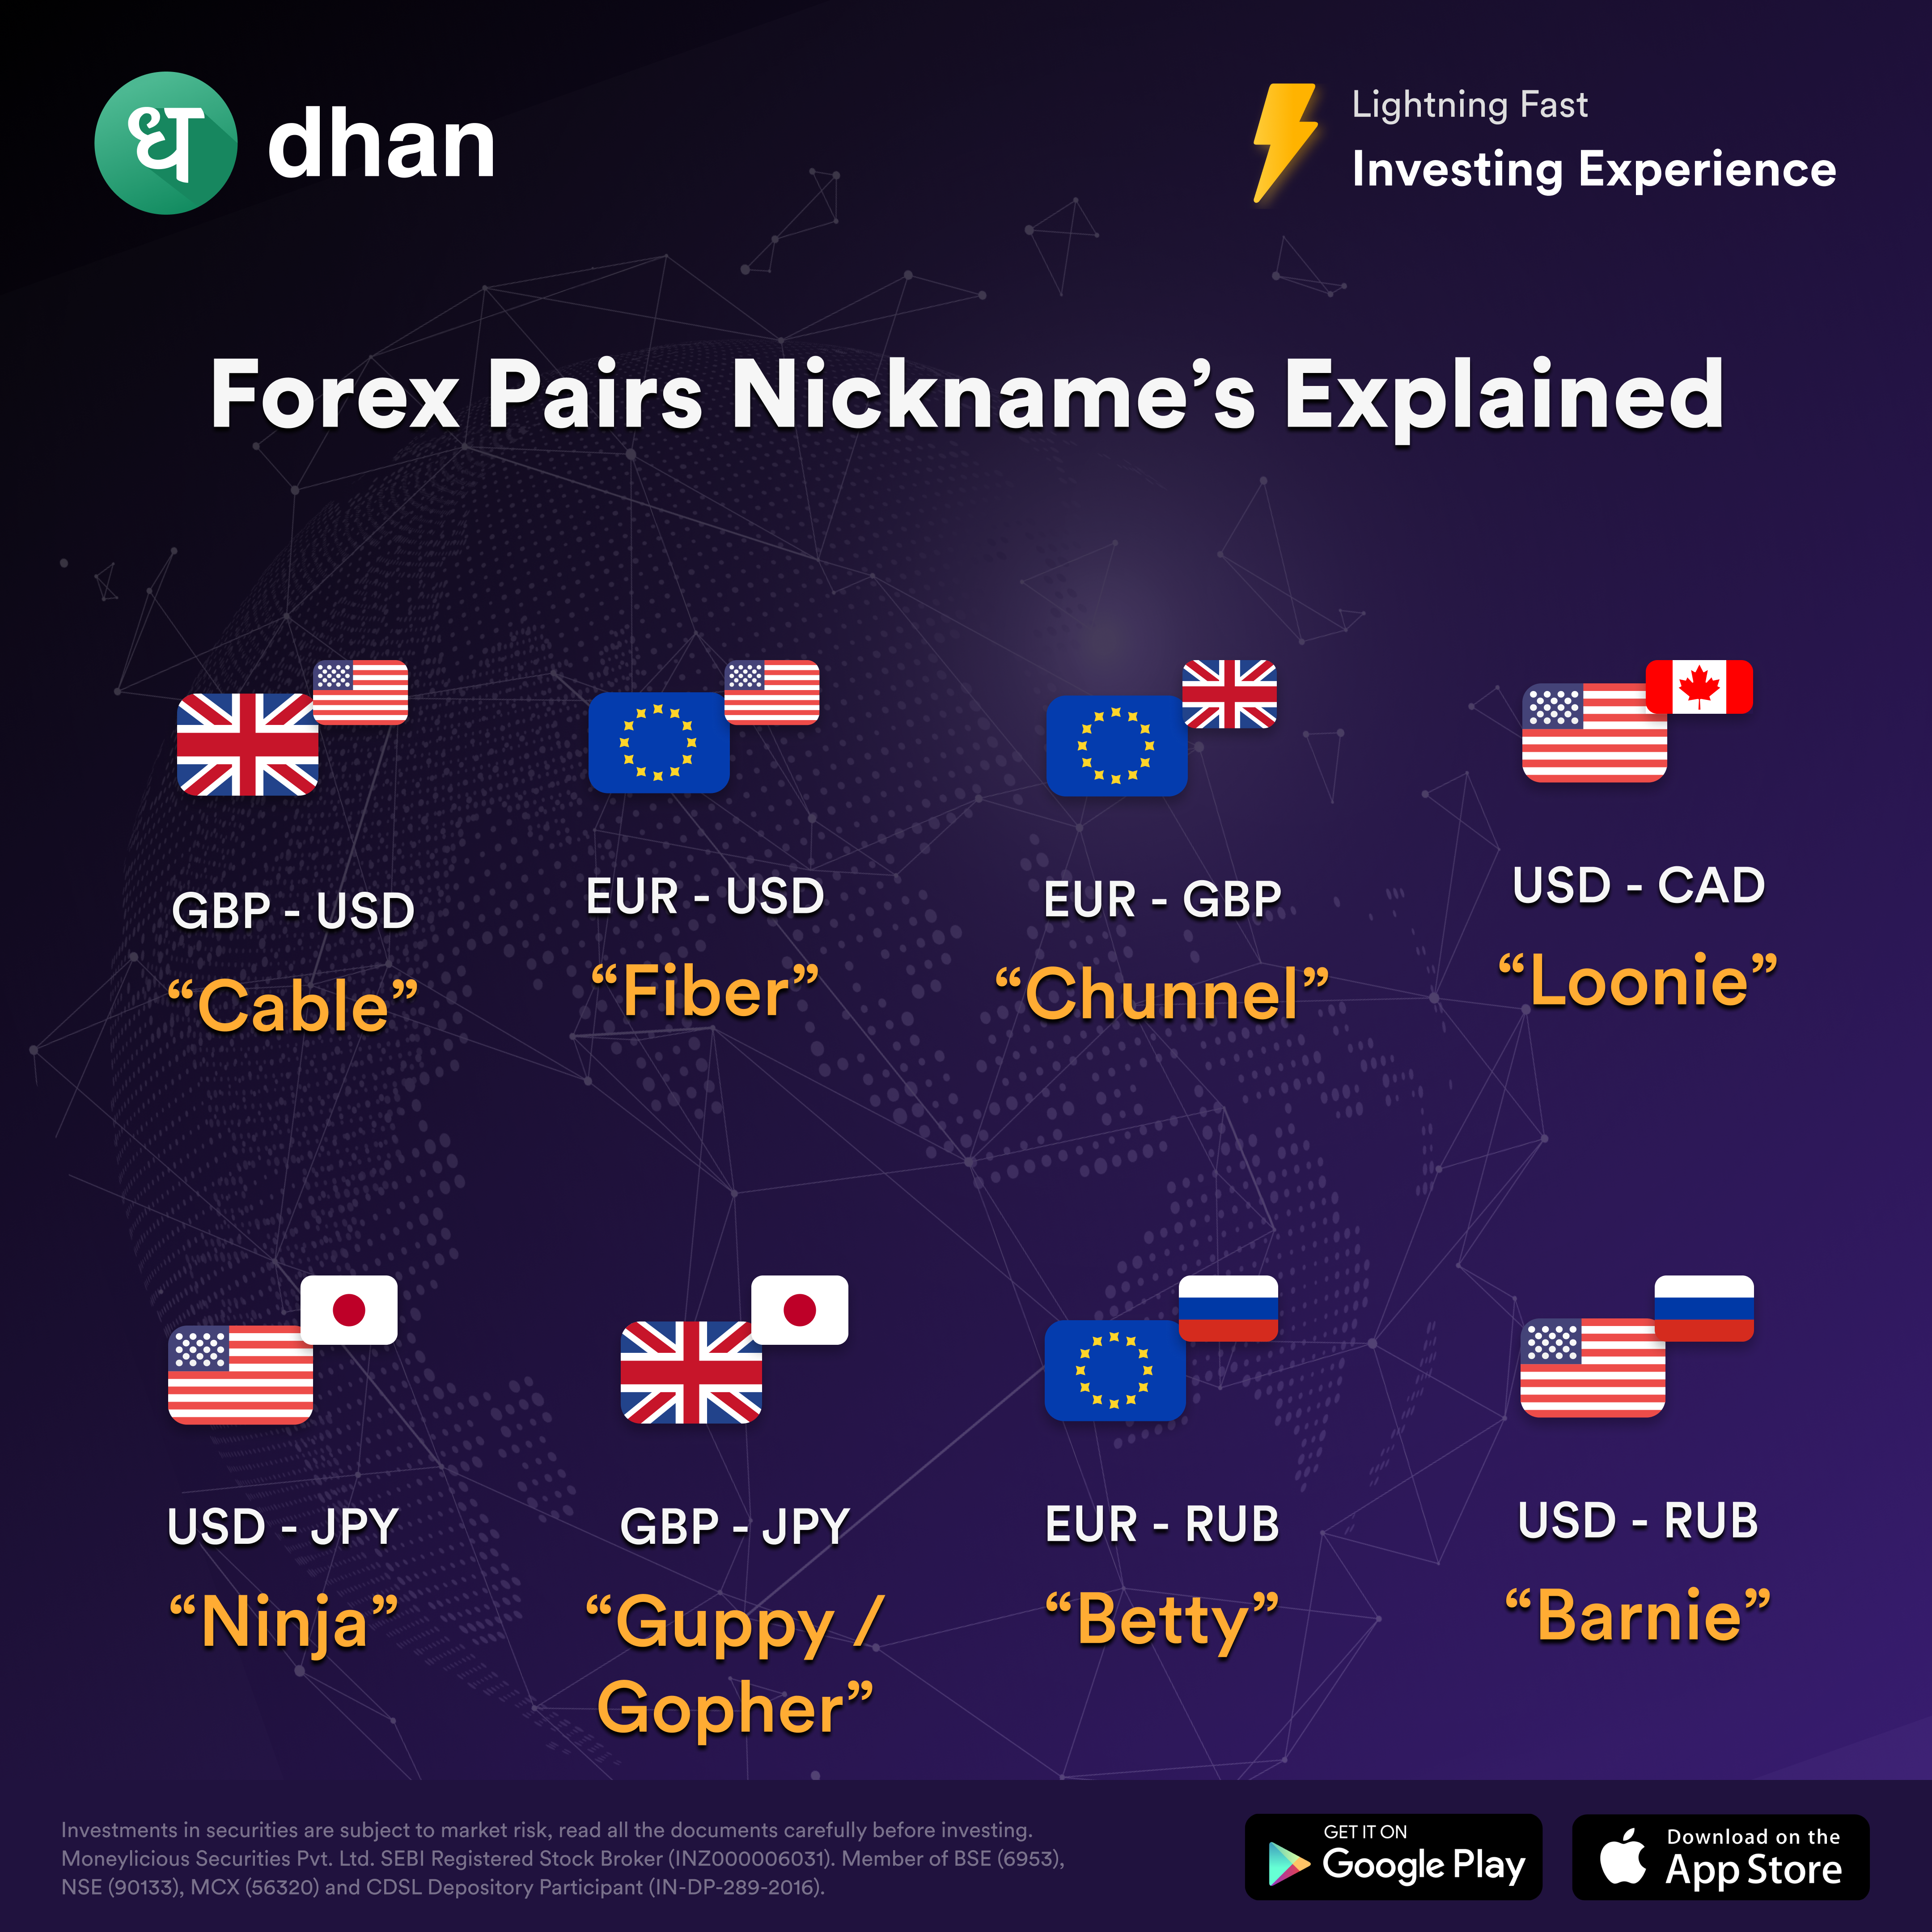 Forex pair nicknames explained